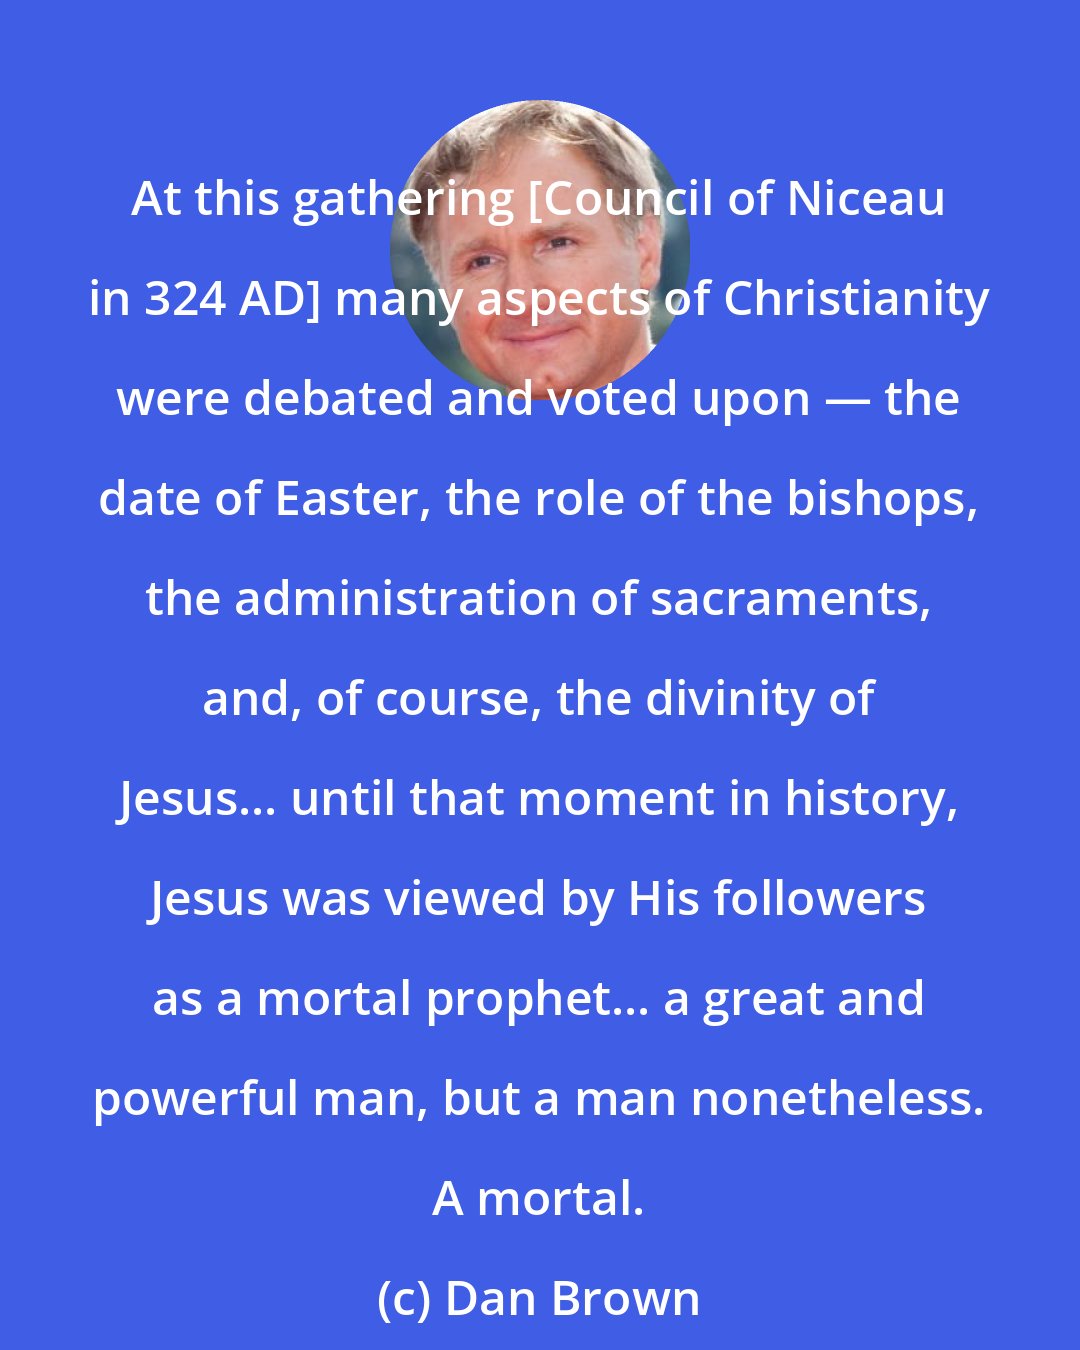 Dan Brown: At this gathering [Council of Niceau in 324 AD] many aspects of Christianity were debated and voted upon ― the date of Easter, the role of the bishops, the administration of sacraments, and, of course, the divinity of Jesus... until that moment in history, Jesus was viewed by His followers as a mortal prophet... a great and powerful man, but a man nonetheless. A mortal.